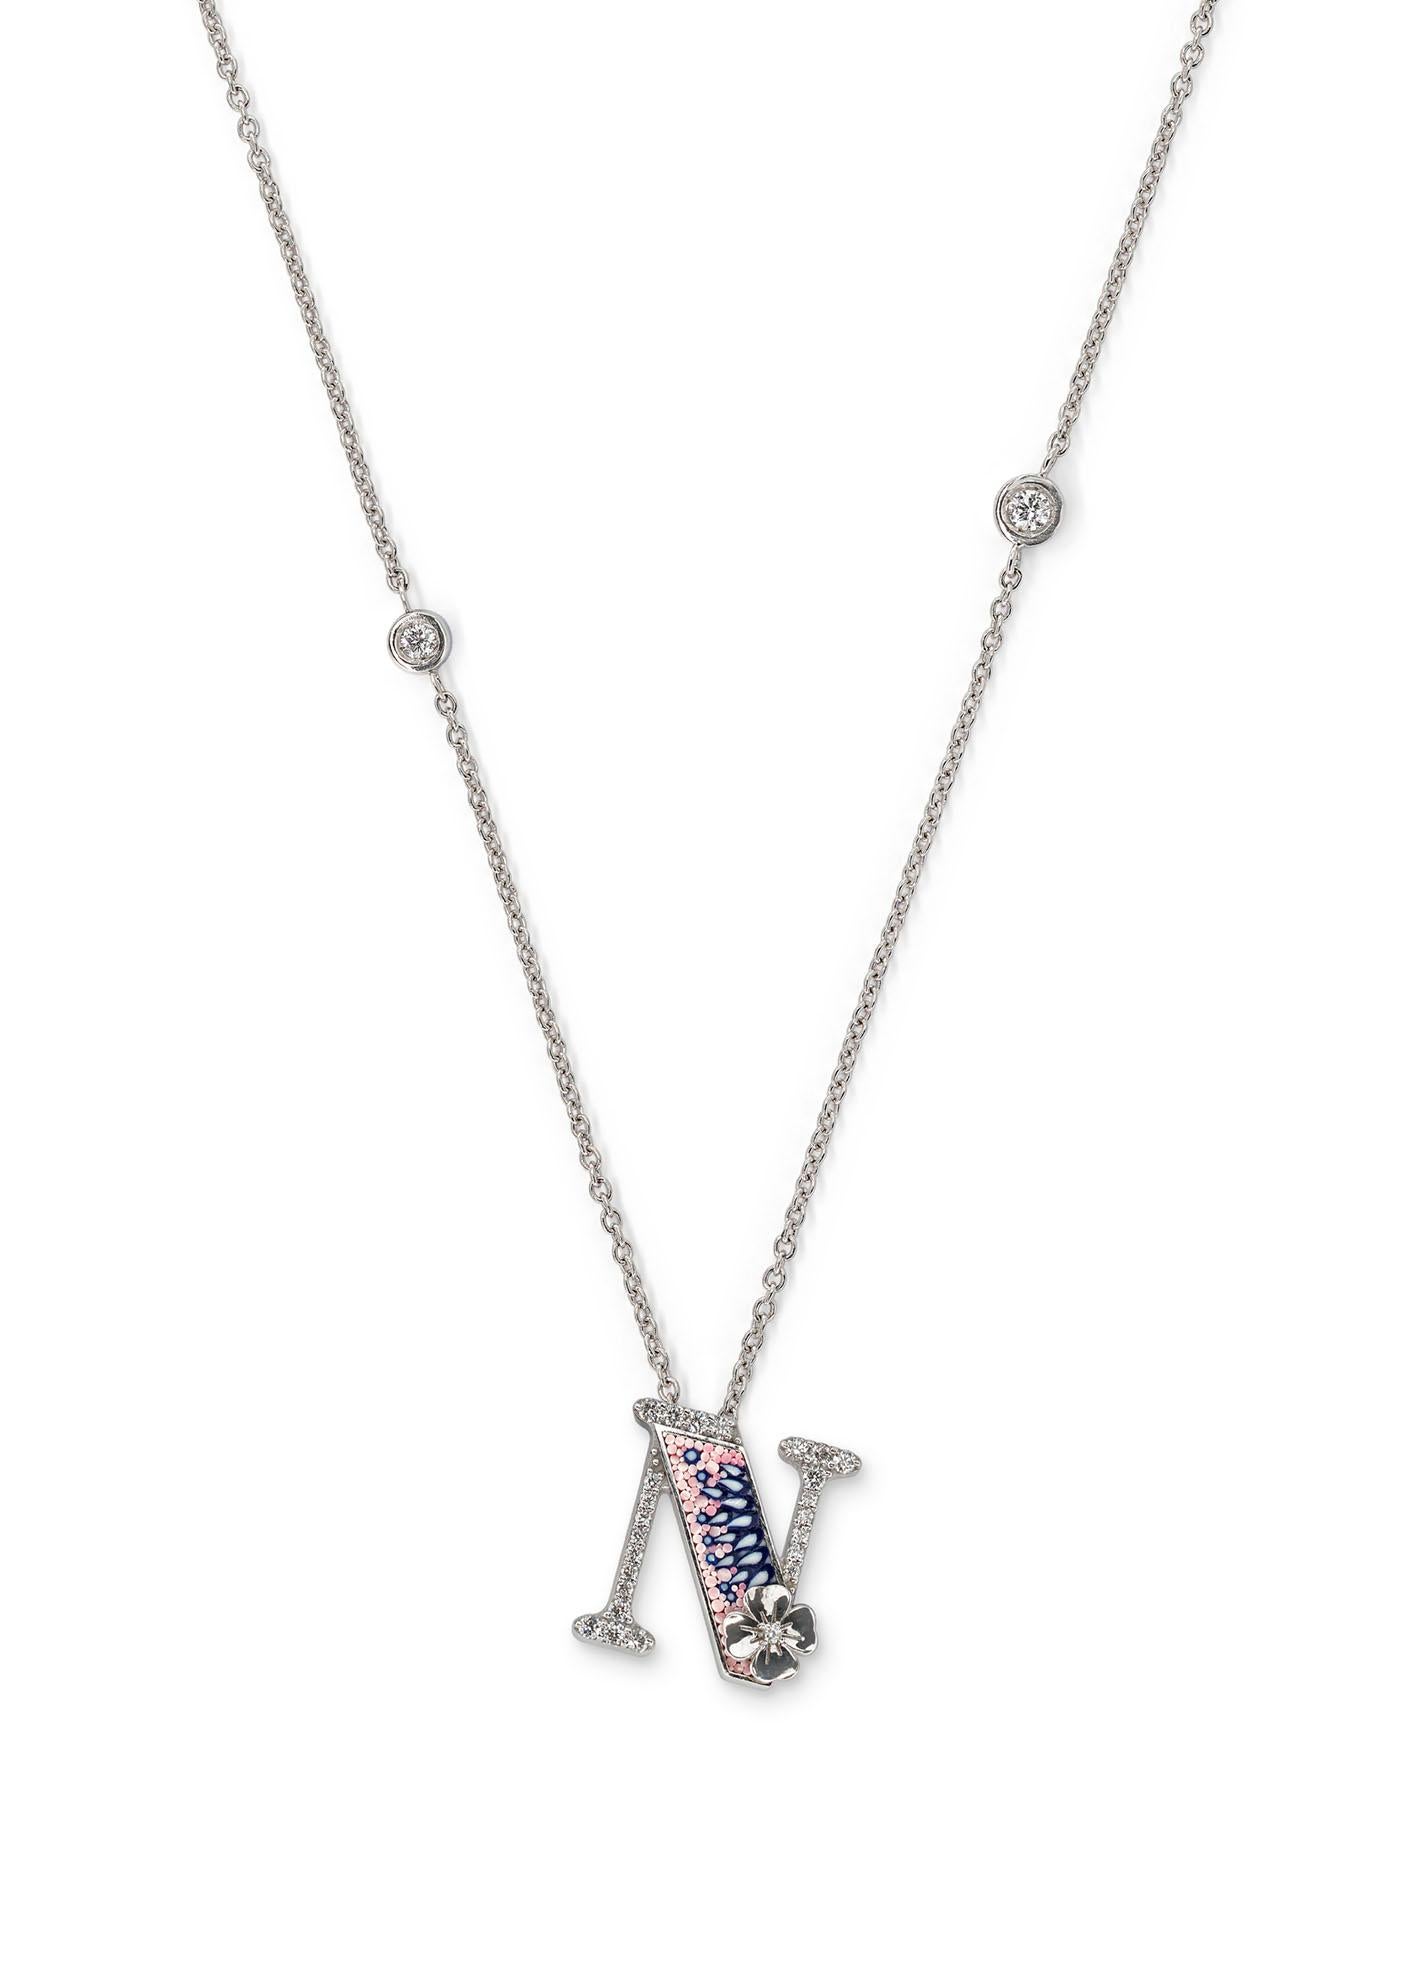 Contemporary Necklace Letter N White Gold White Diamonds Hand Decorated with Micromosaic For Sale